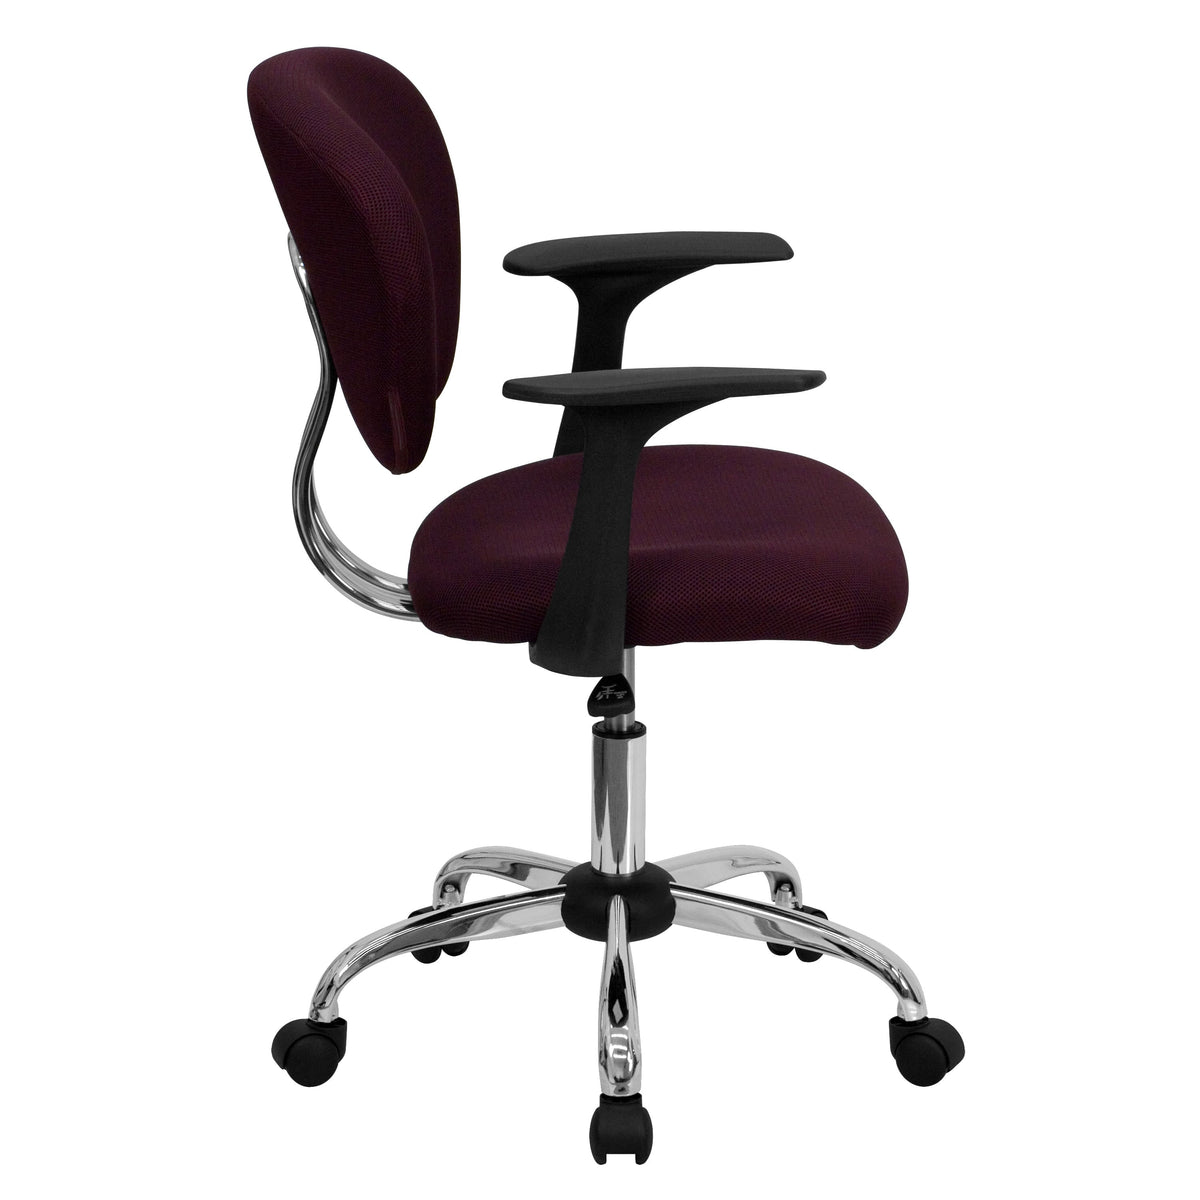 Burgundy |#| Mid-Back Burgundy Mesh Padded Swivel Task Office Chair with Chrome Base and Arms